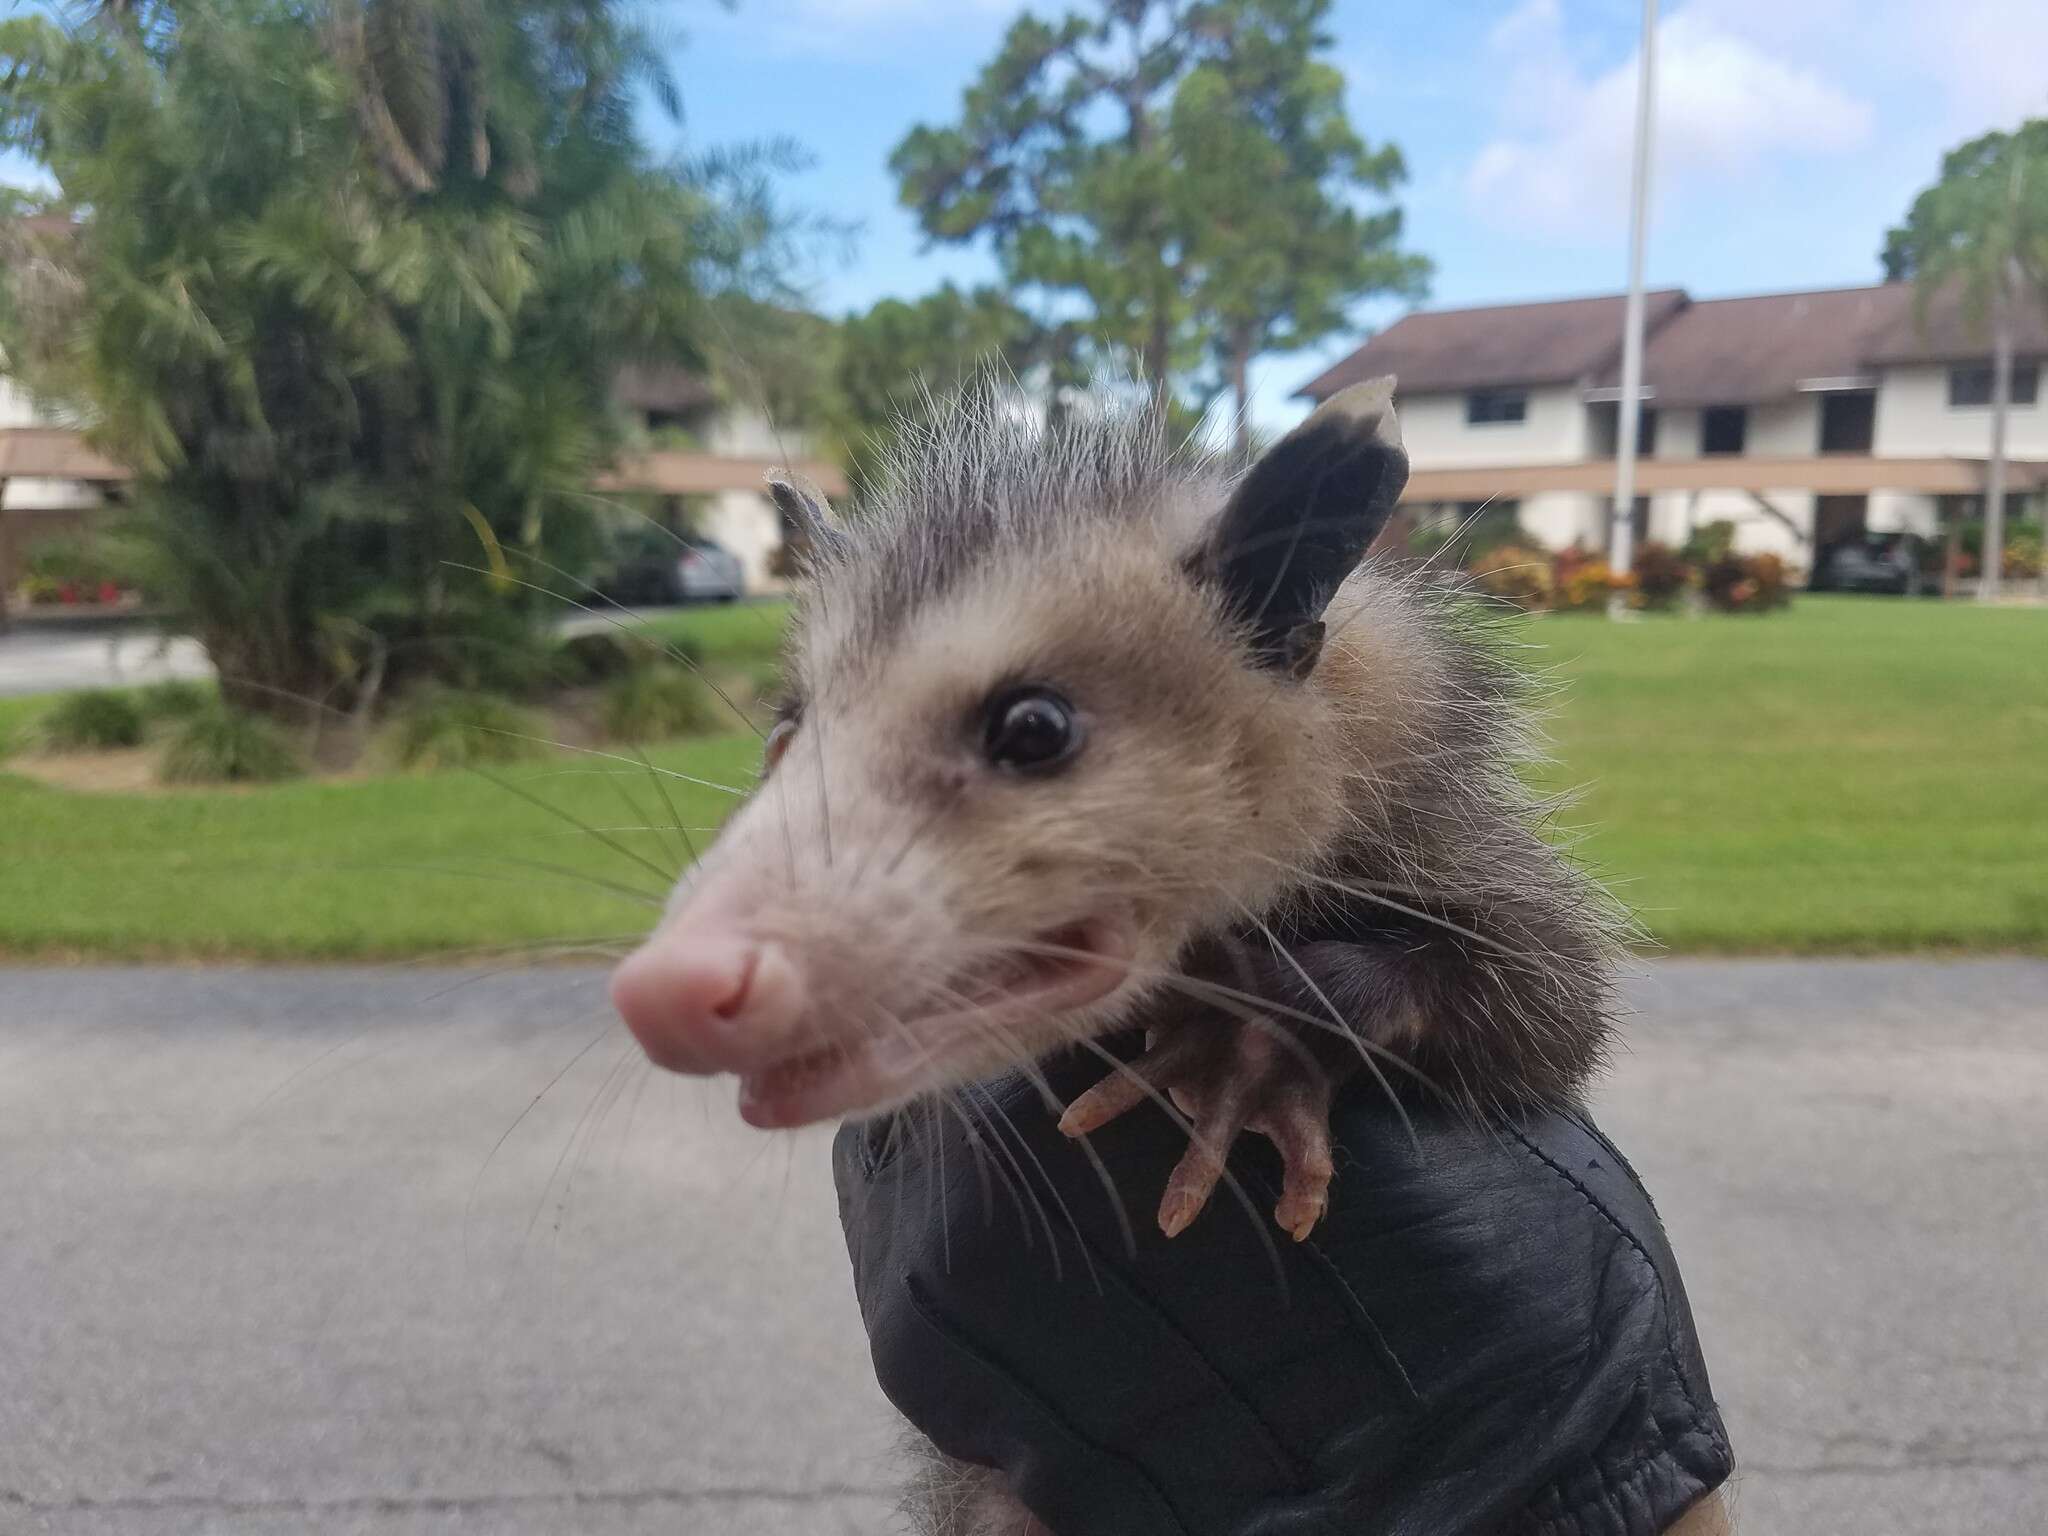 Opossum freed from dumpster